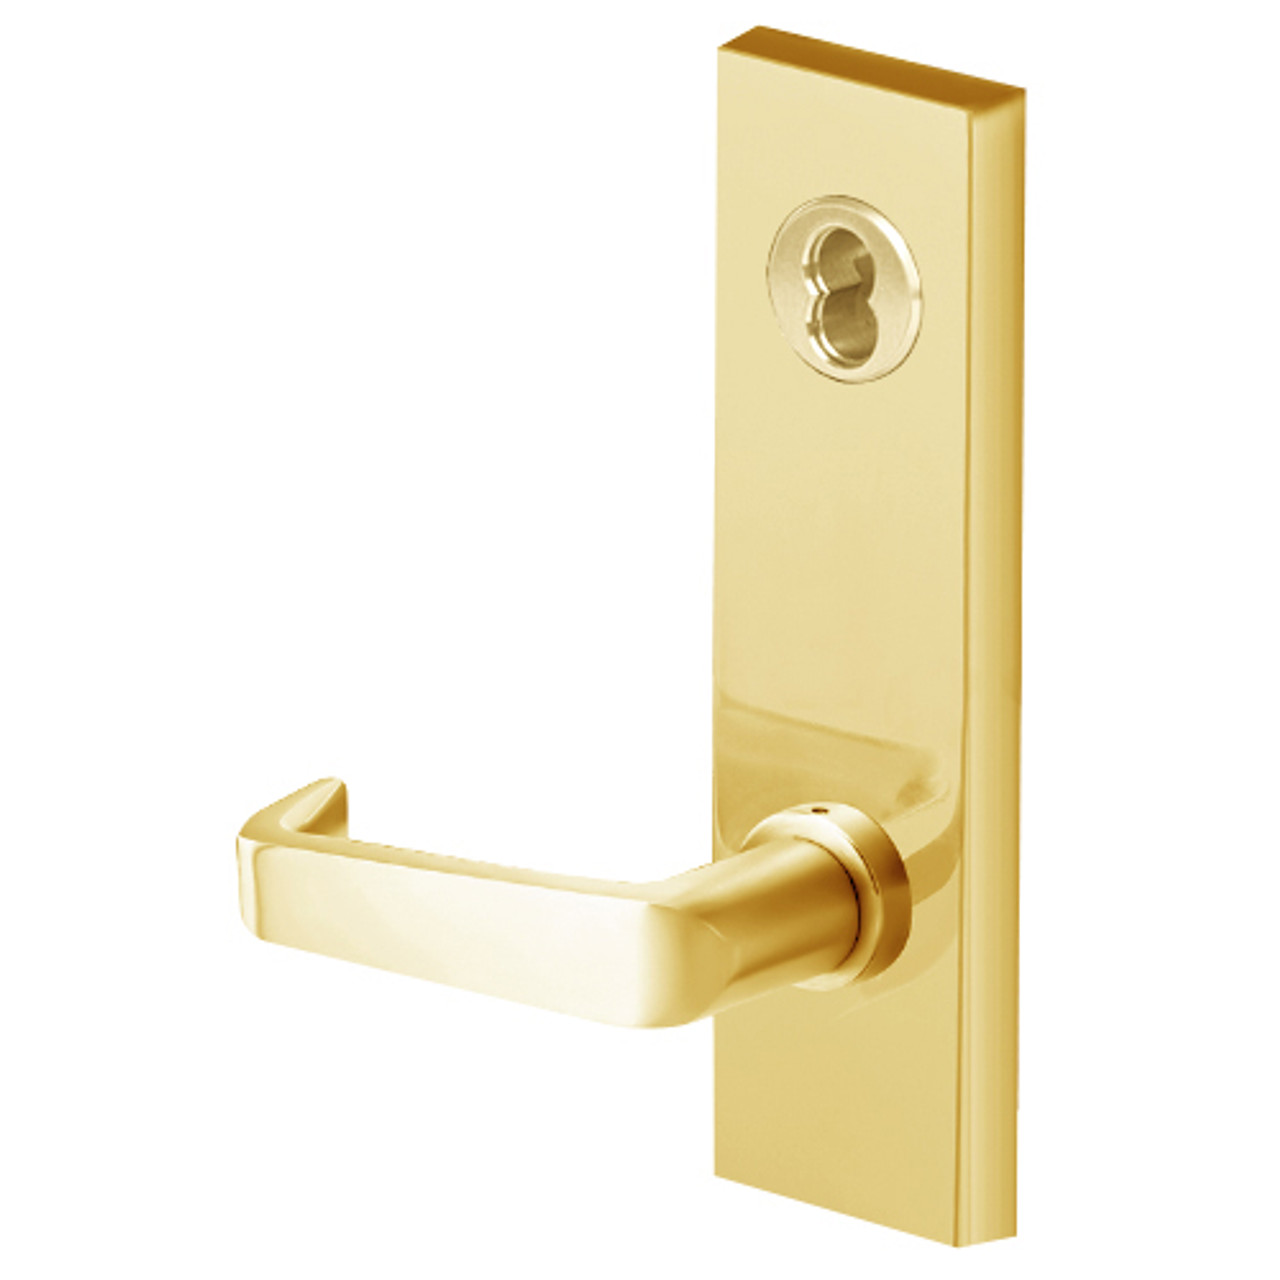 45HW7TWEL15M605RQE12V Best 40HW series Double Key Deadbolt Fail Safe Electromechanical Mortise Lever Lock with Contour w/ Angle Return Style in Bright Brass